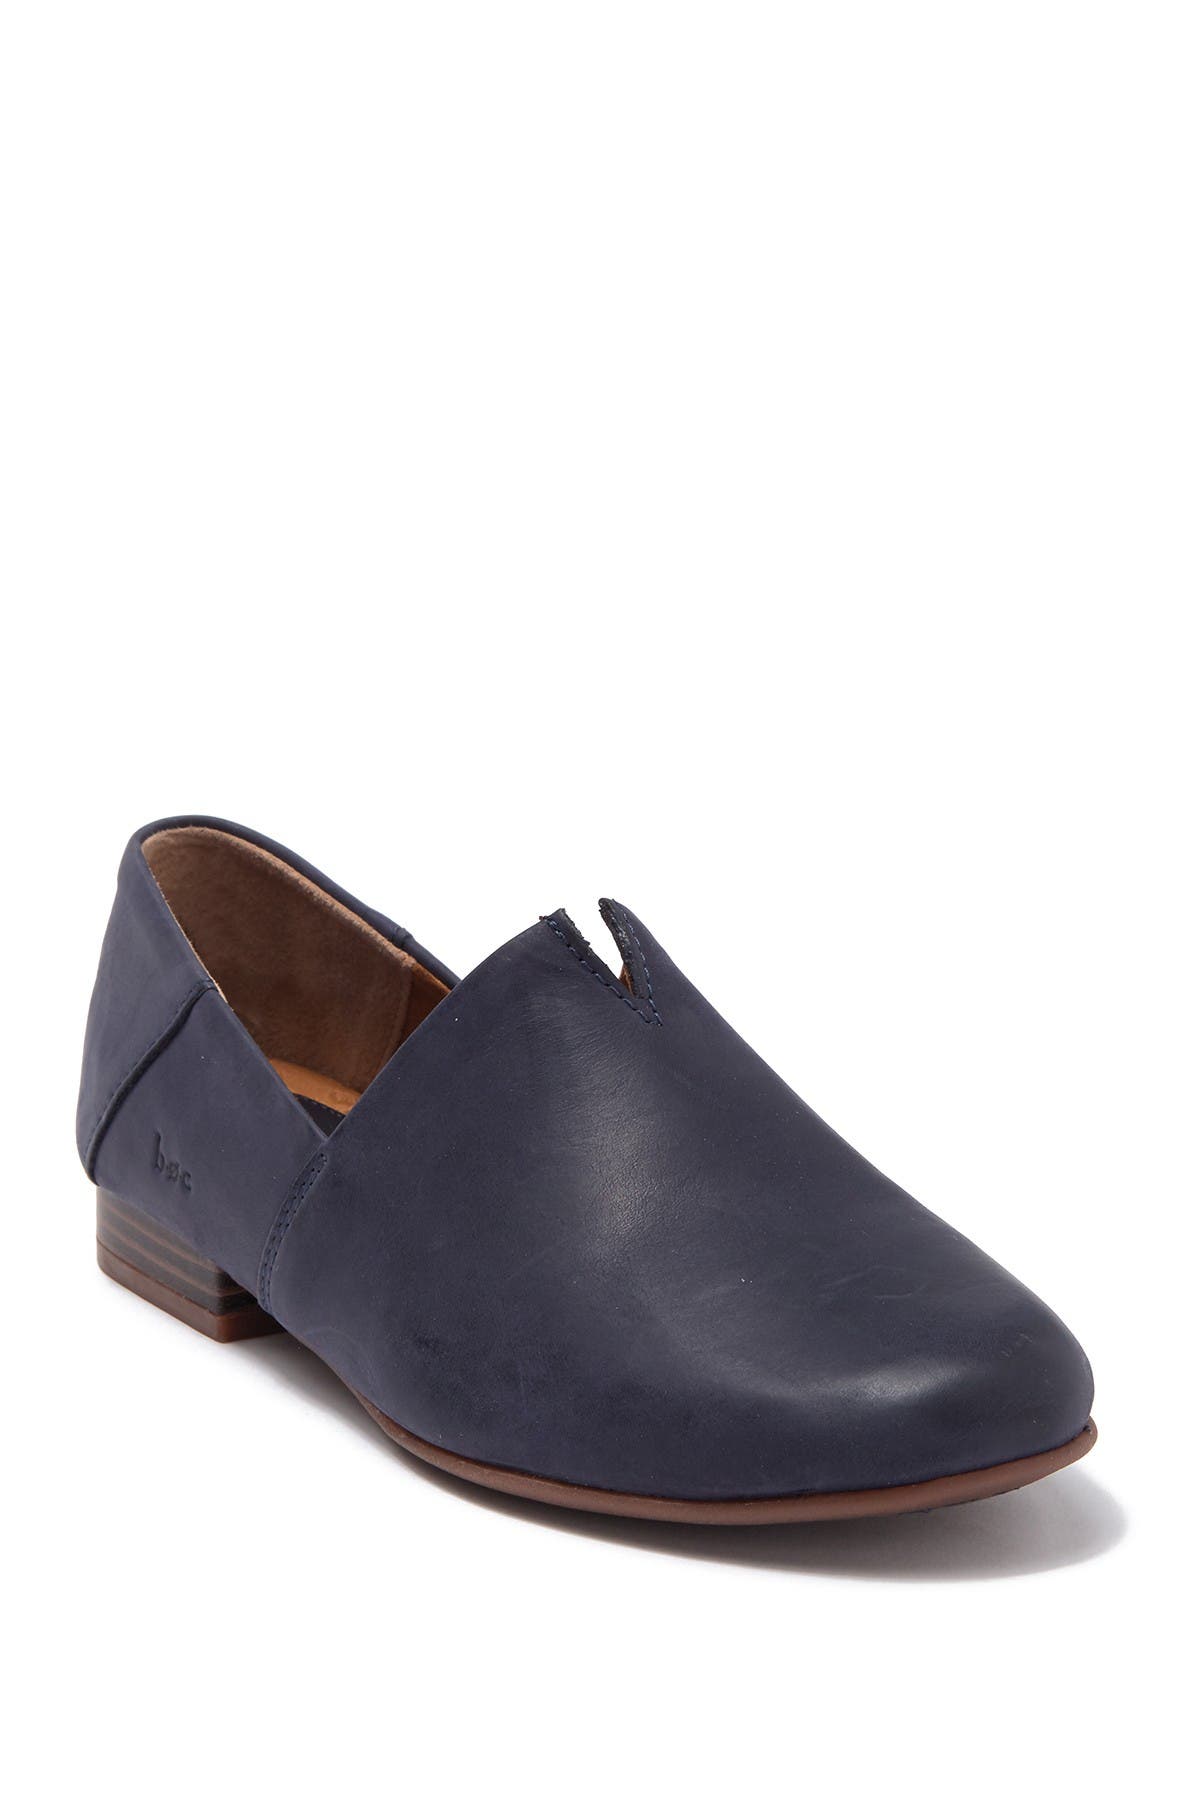 B.O.C. BY BORN | Suree Leather Loafer 